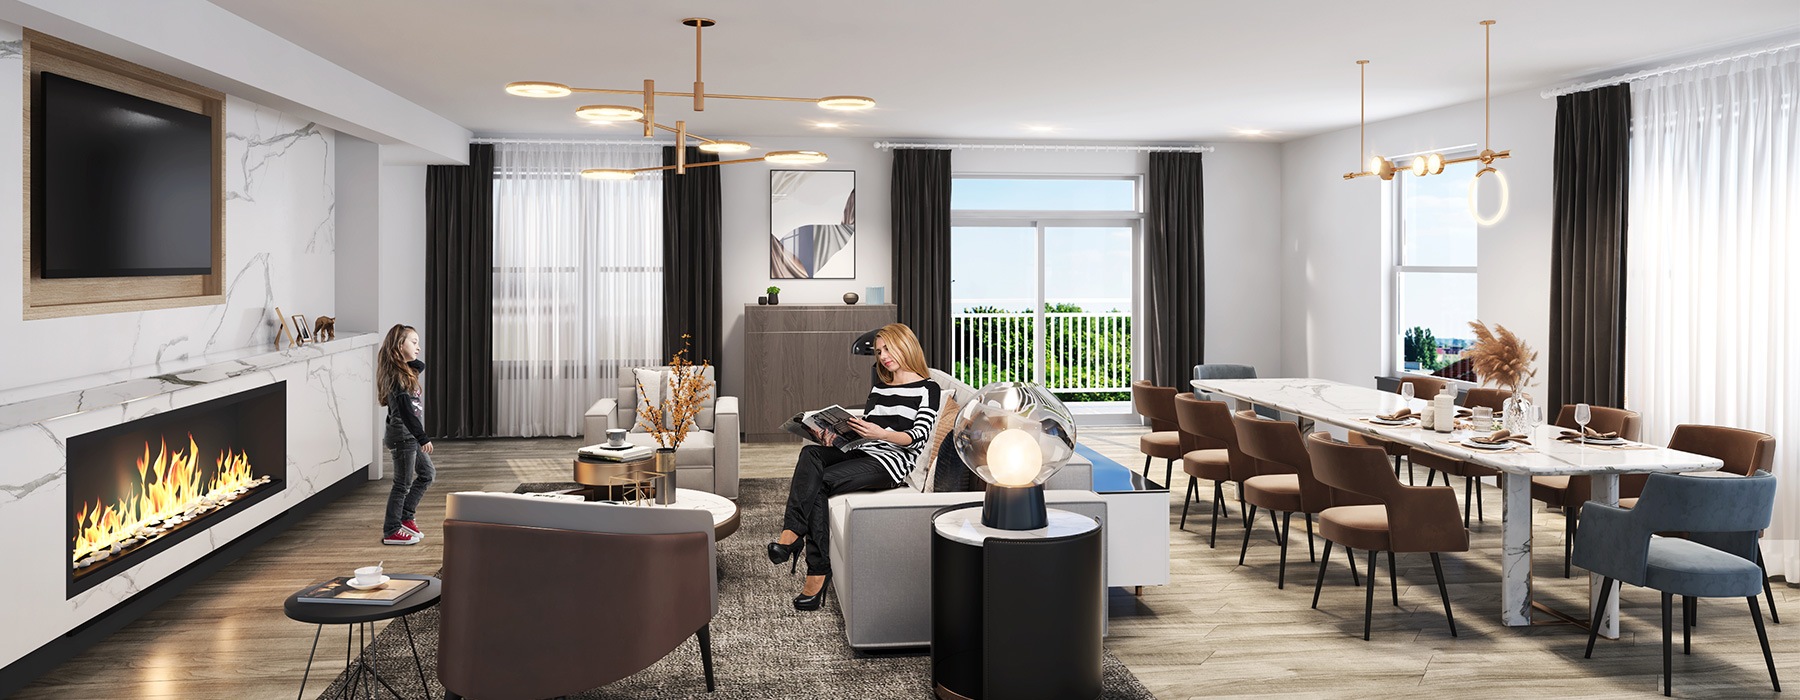 rendering of living area that has open areas for easy relaxing, connected dining room and ample seating